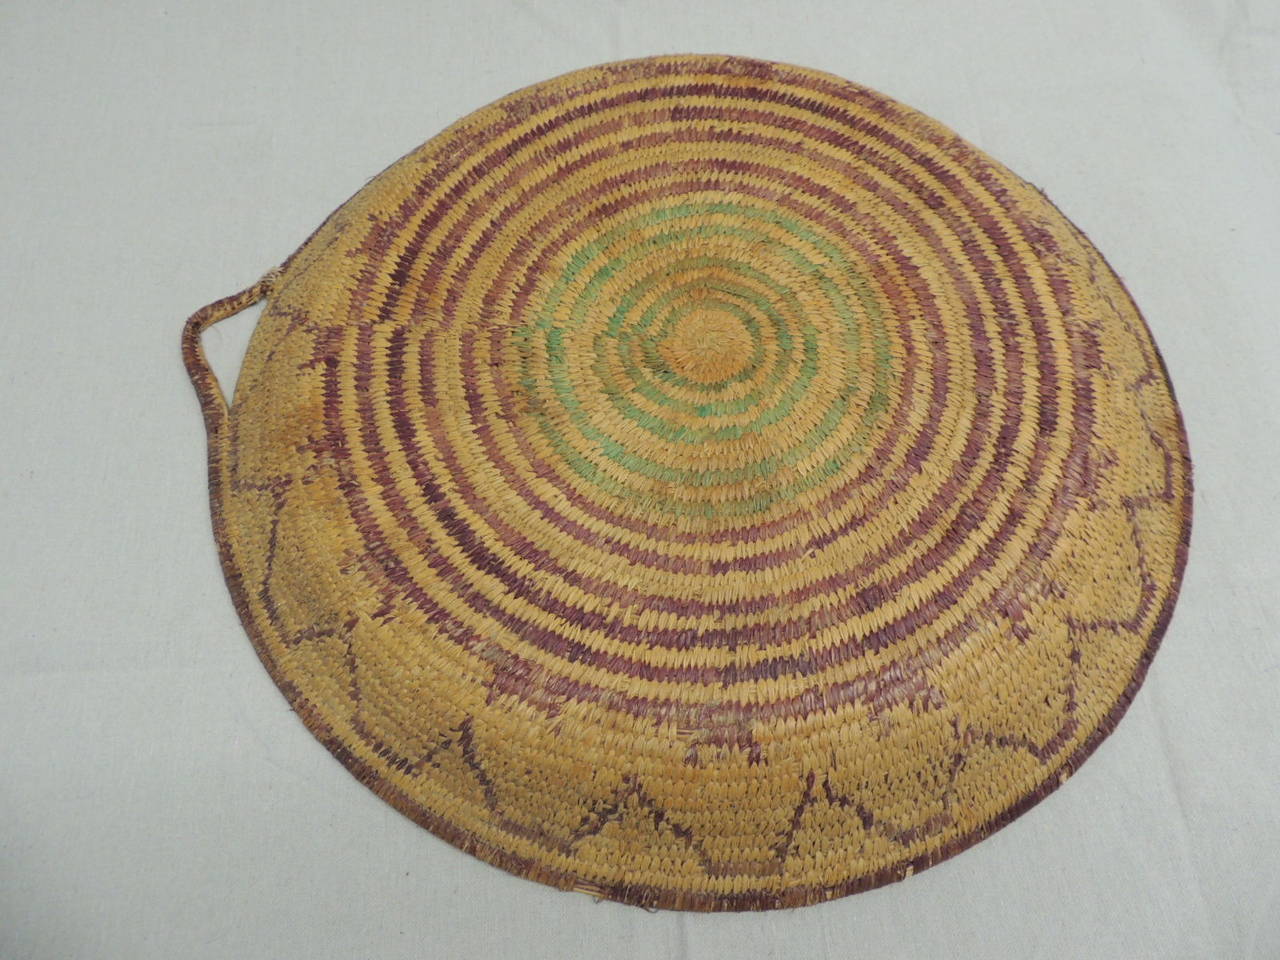 Hand-Woven Large Round Tribal Woven Artisanal Basket with Handle